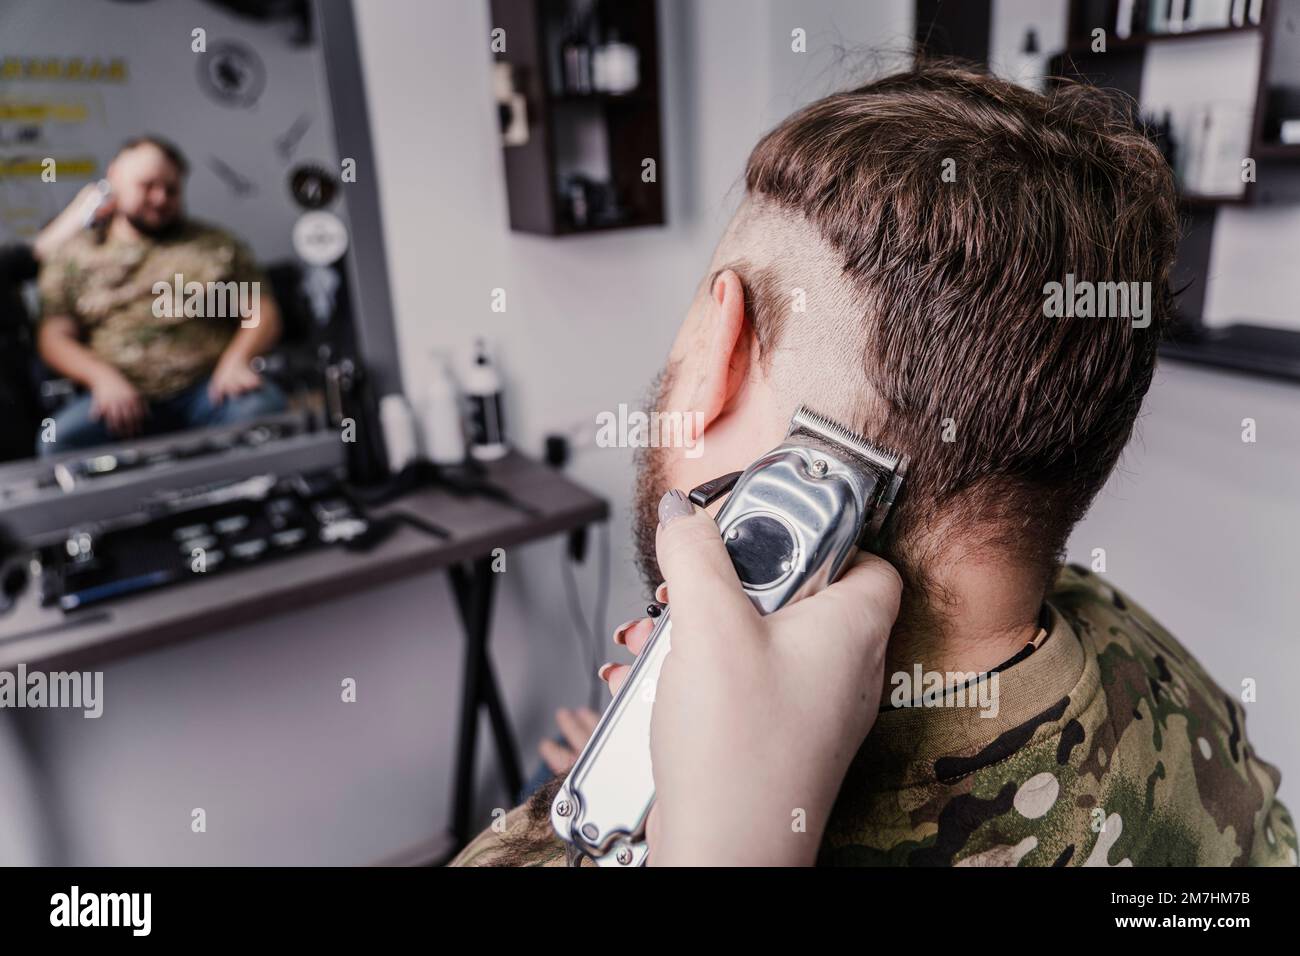 A young man in a military uniform shaves his head bald for military service. A guy with a beard gets a haircut at a barber shop. shave your bald head Stock Photo